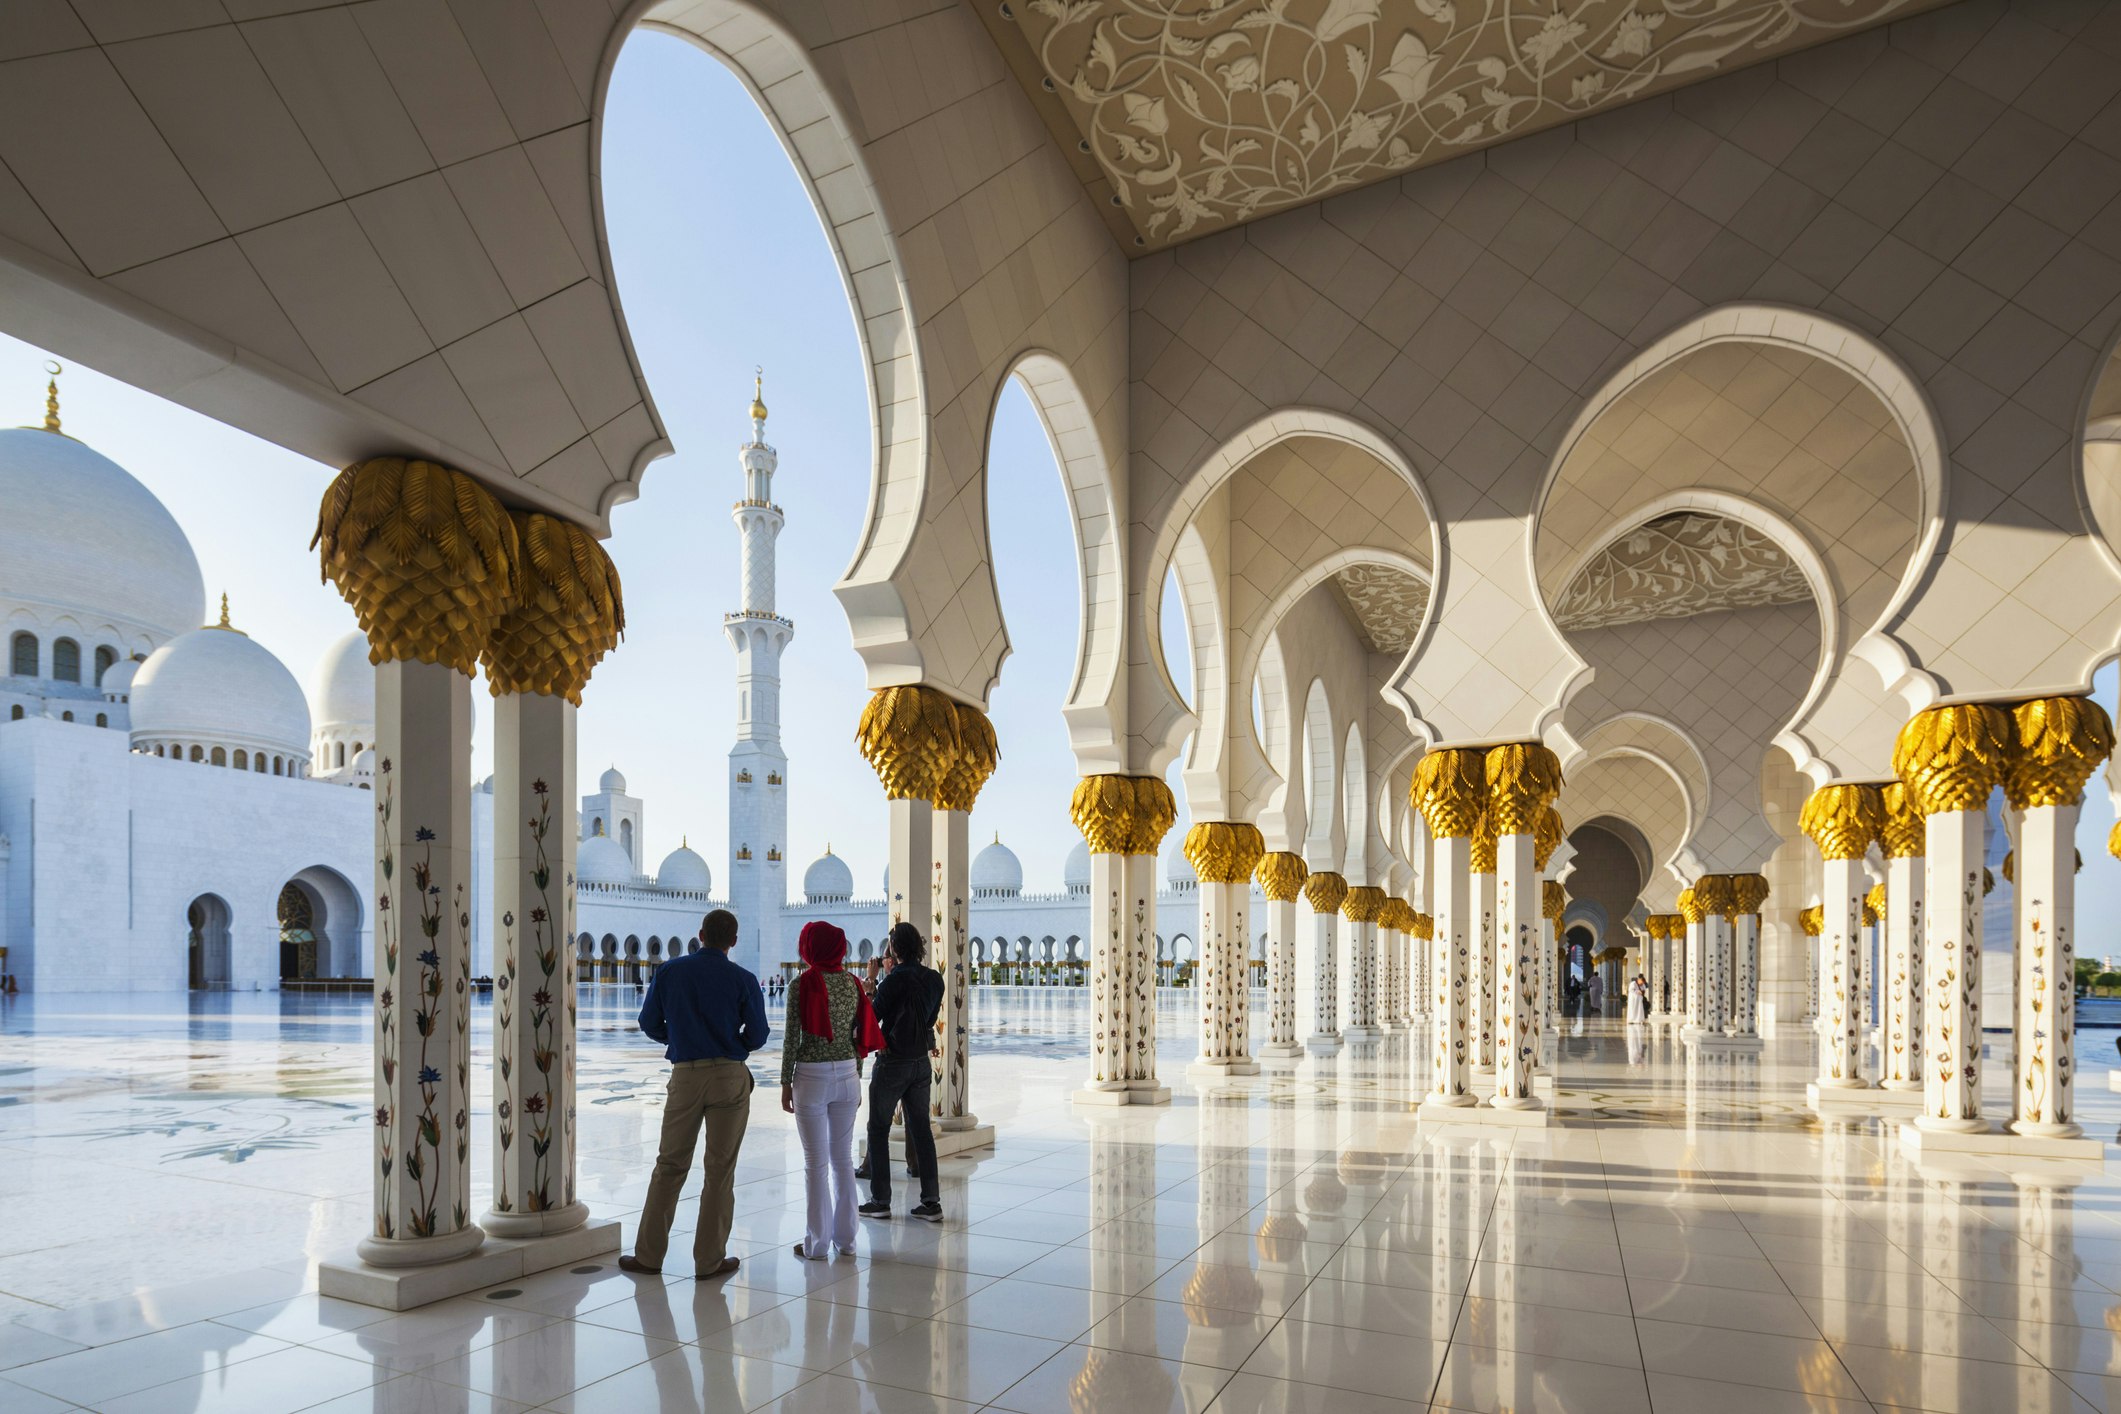 Decorative arches at Sheikh Zayed Grand Mosque, with a small group of visitors in the foreground